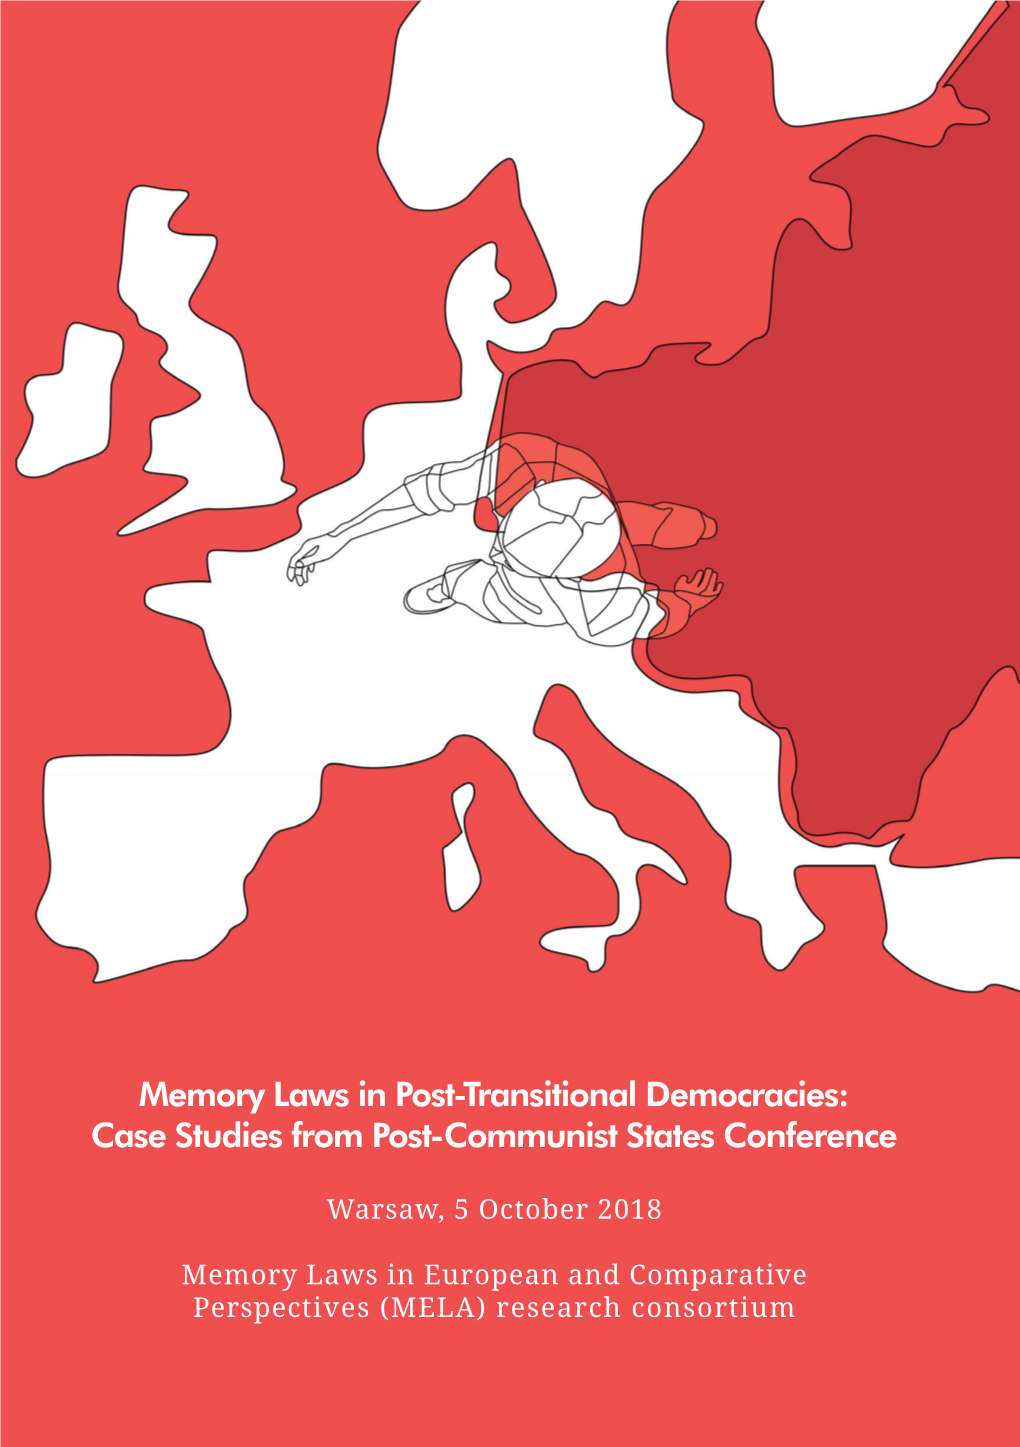 Memory Laws in Post-Transitional Democracies: Case Studies from Post-Communist States Conference